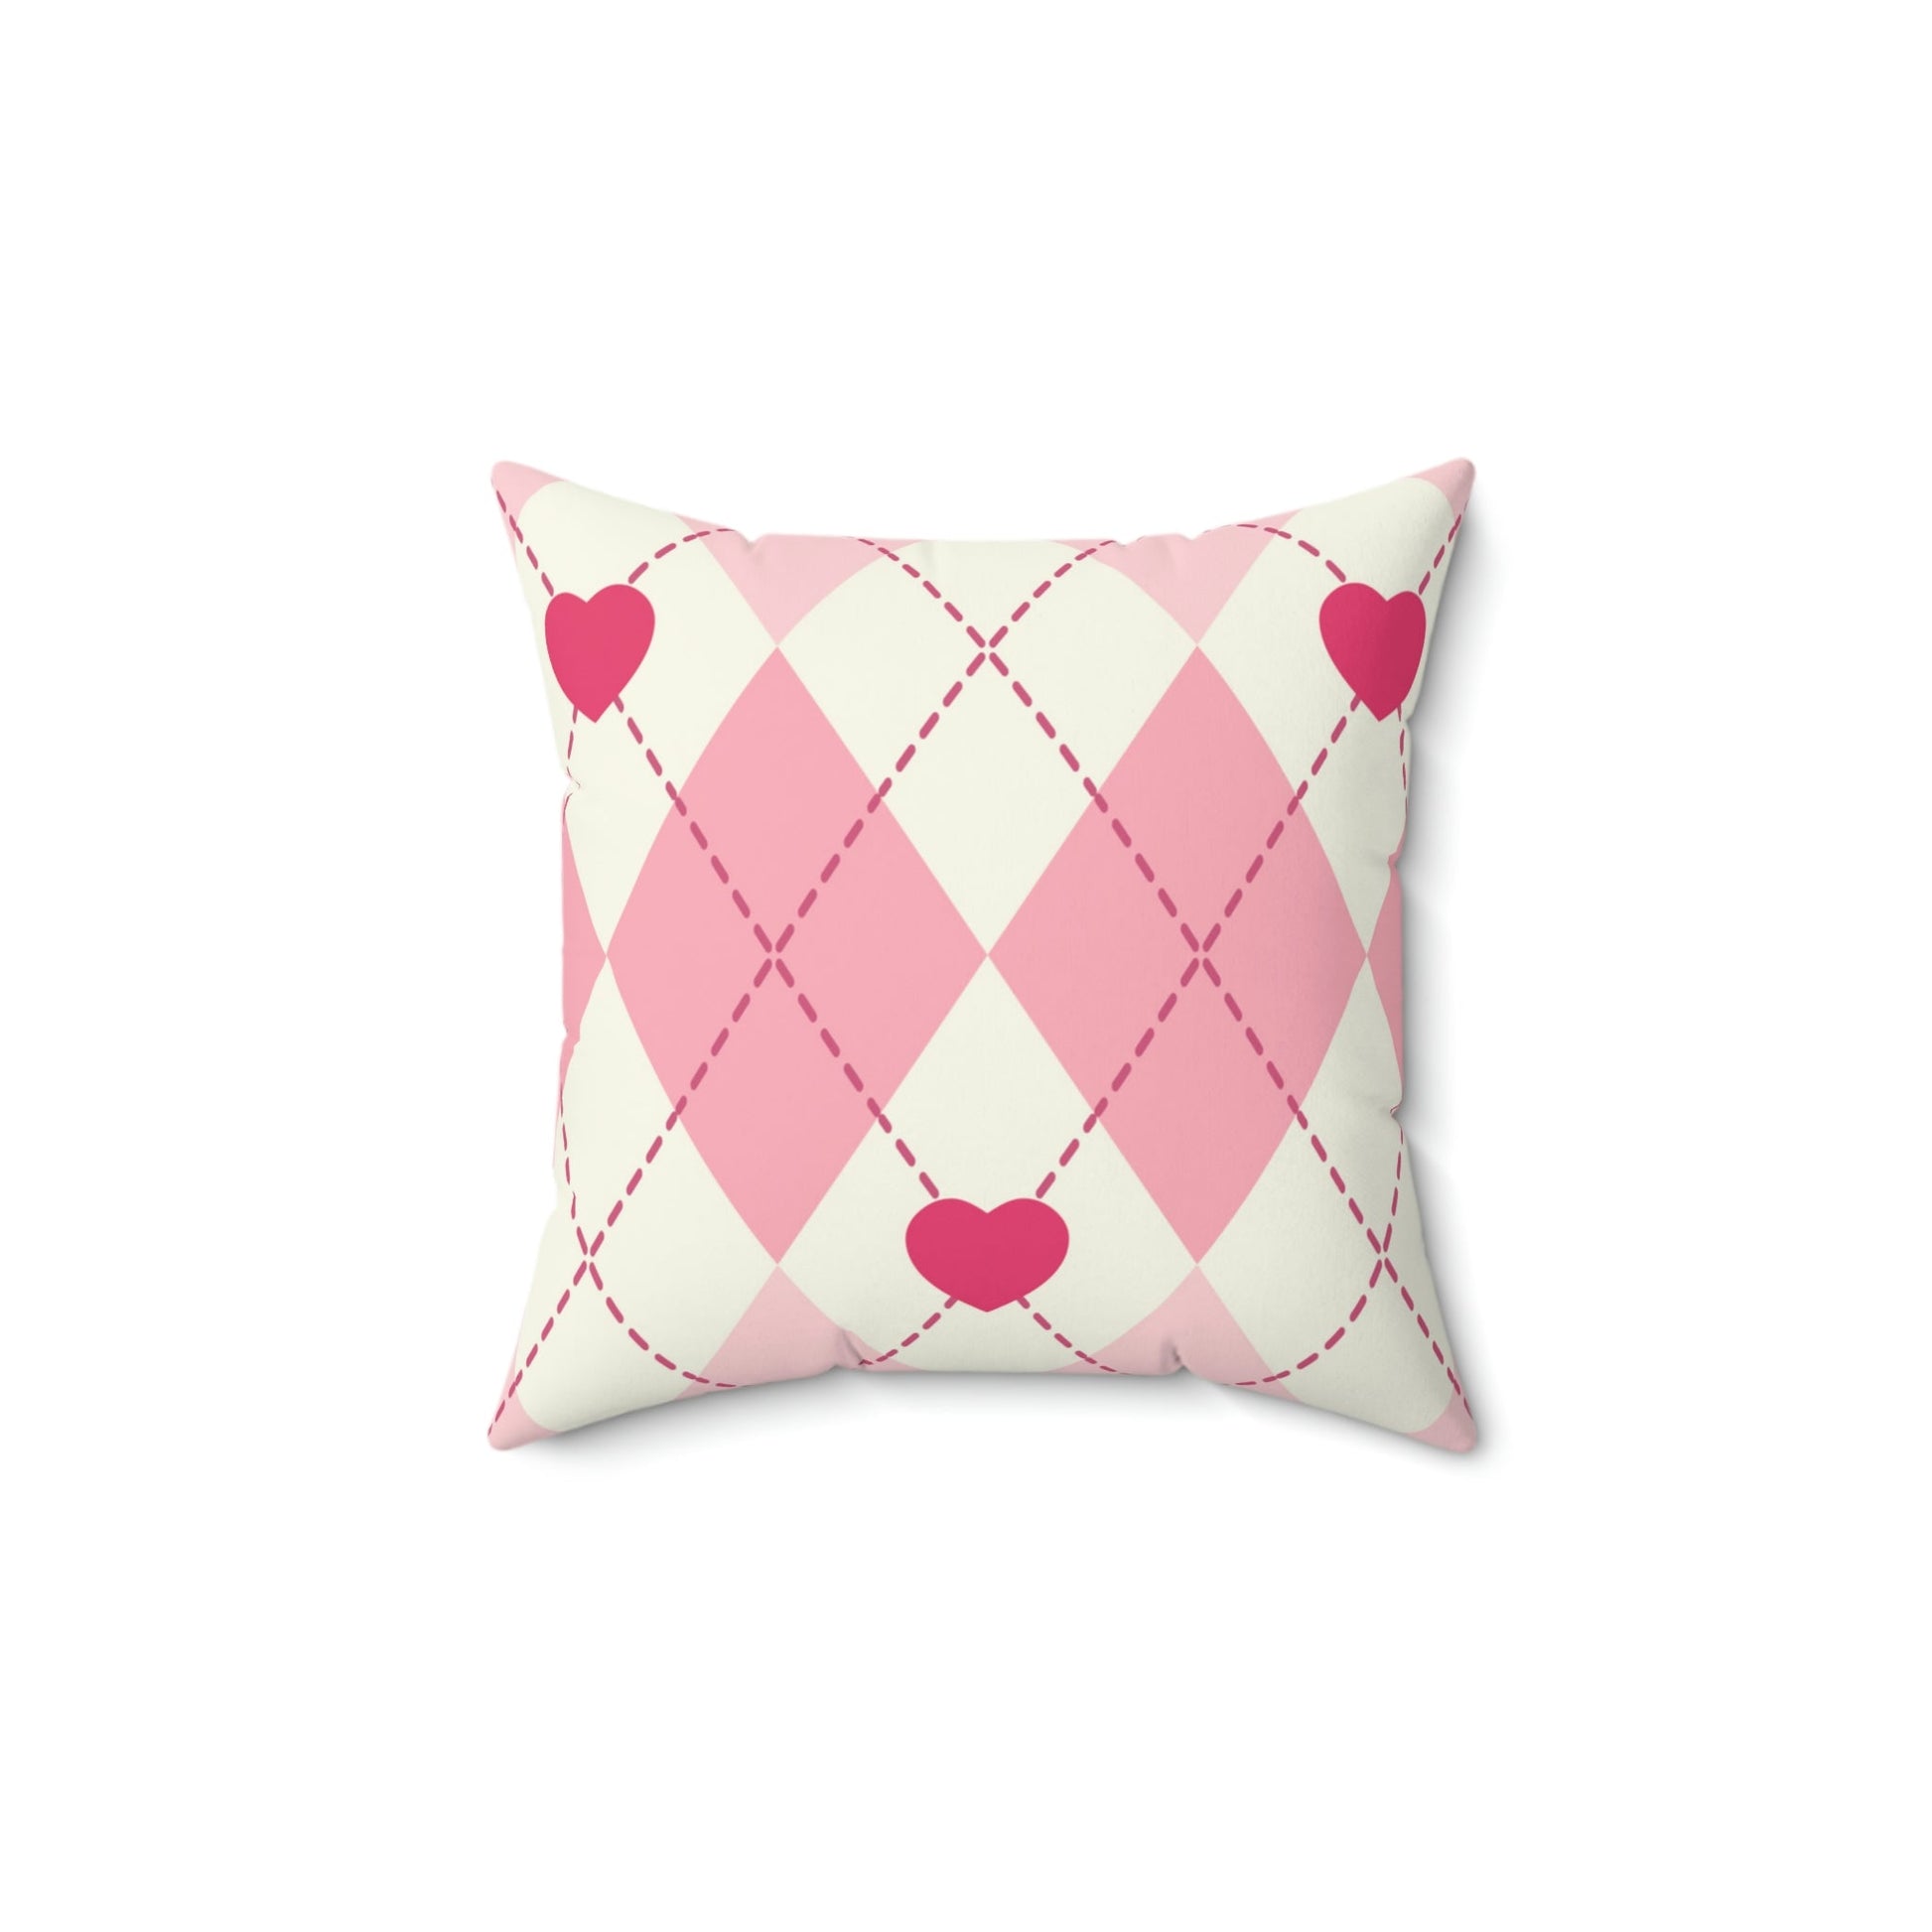 Argyle Hearts Square Pillow Home Decor Pink Sweetheart